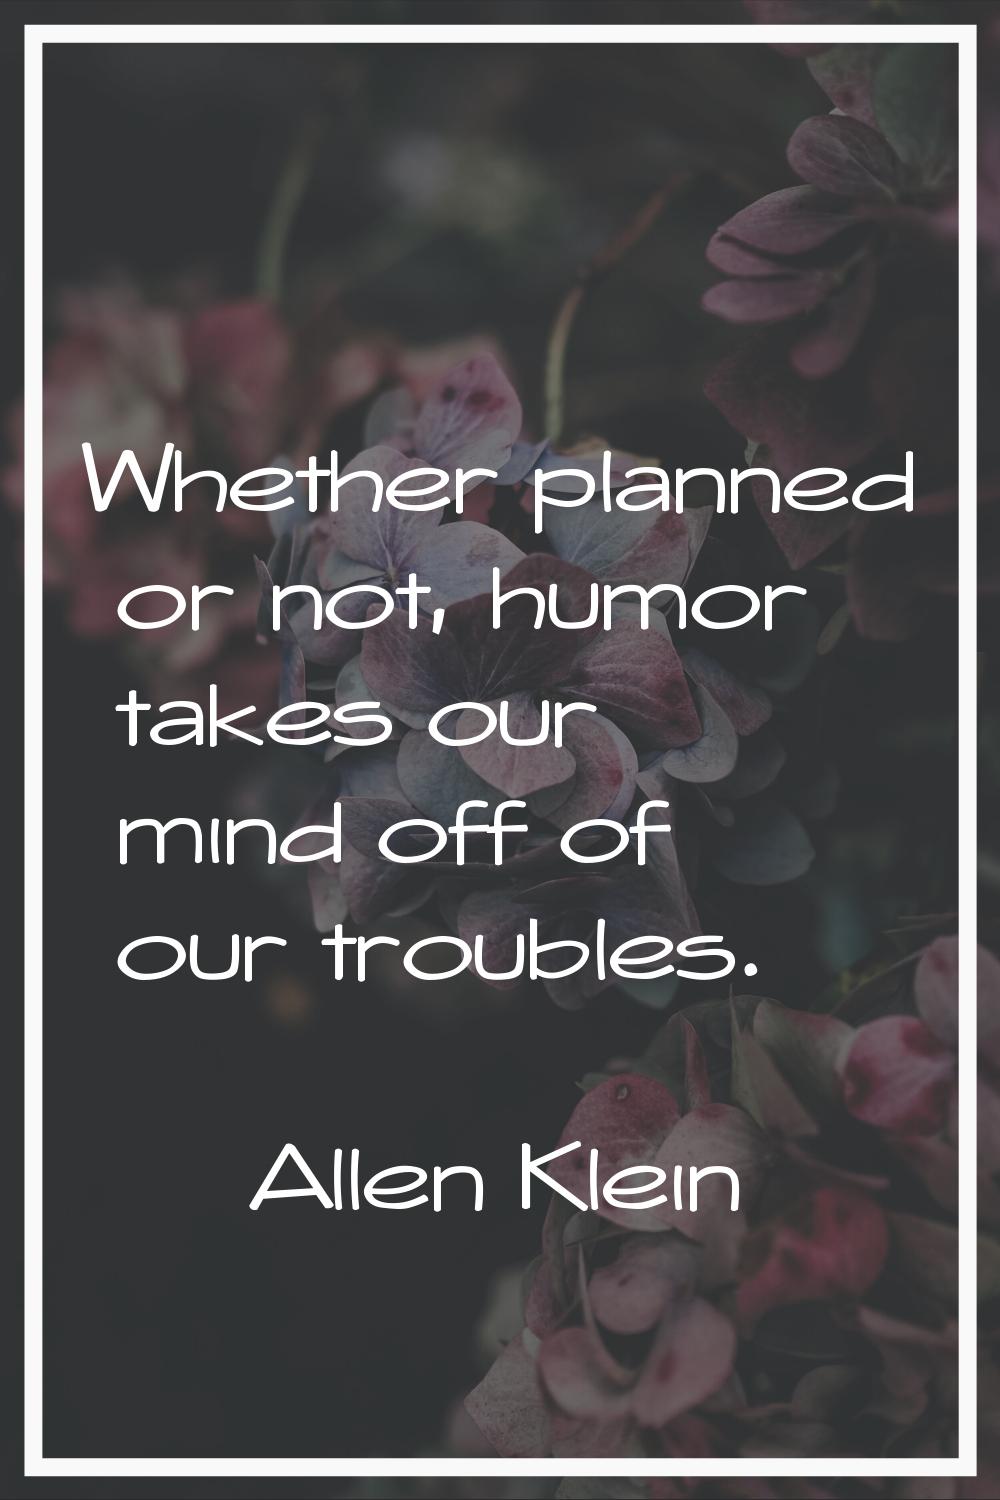 Whether planned or not, humor takes our mind off of our troubles.